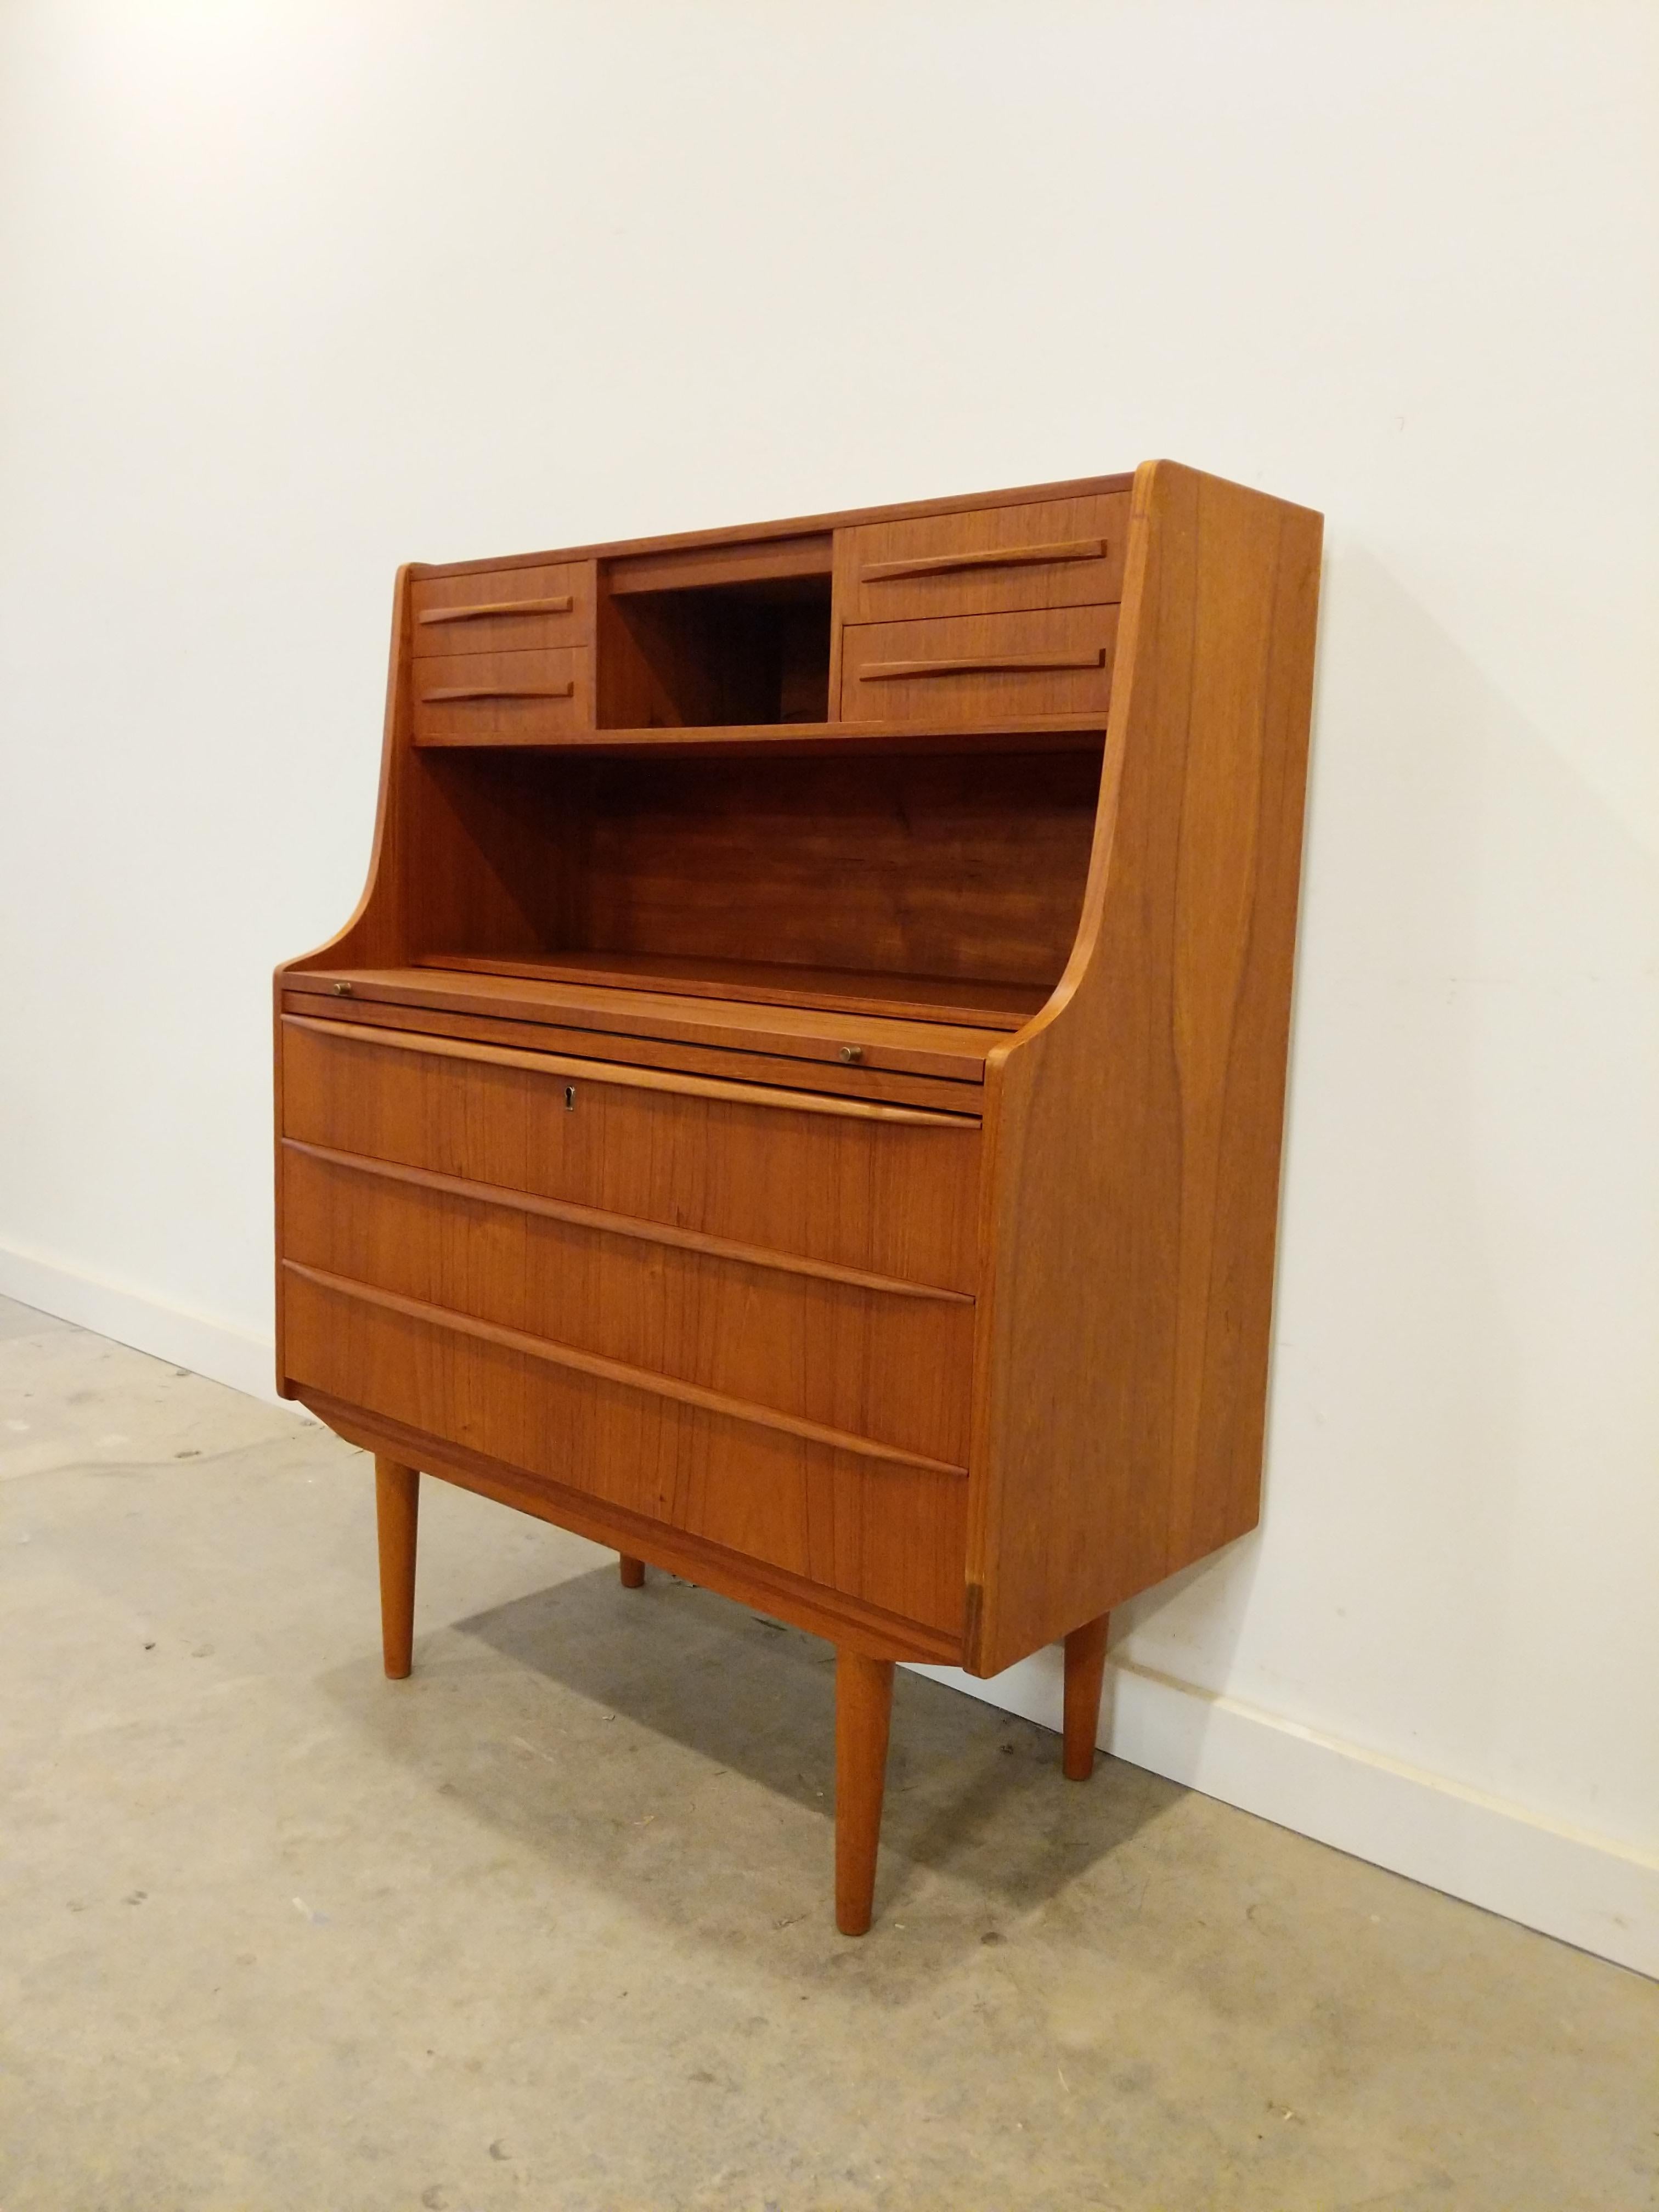 Authentic vintage mid century Danish / Scandinavian Modern teak secretary desk / vanity with mirror.

This piece is in excellent refinished condition with very few signs of age-related wear (see photos).

If you would like any additional details,